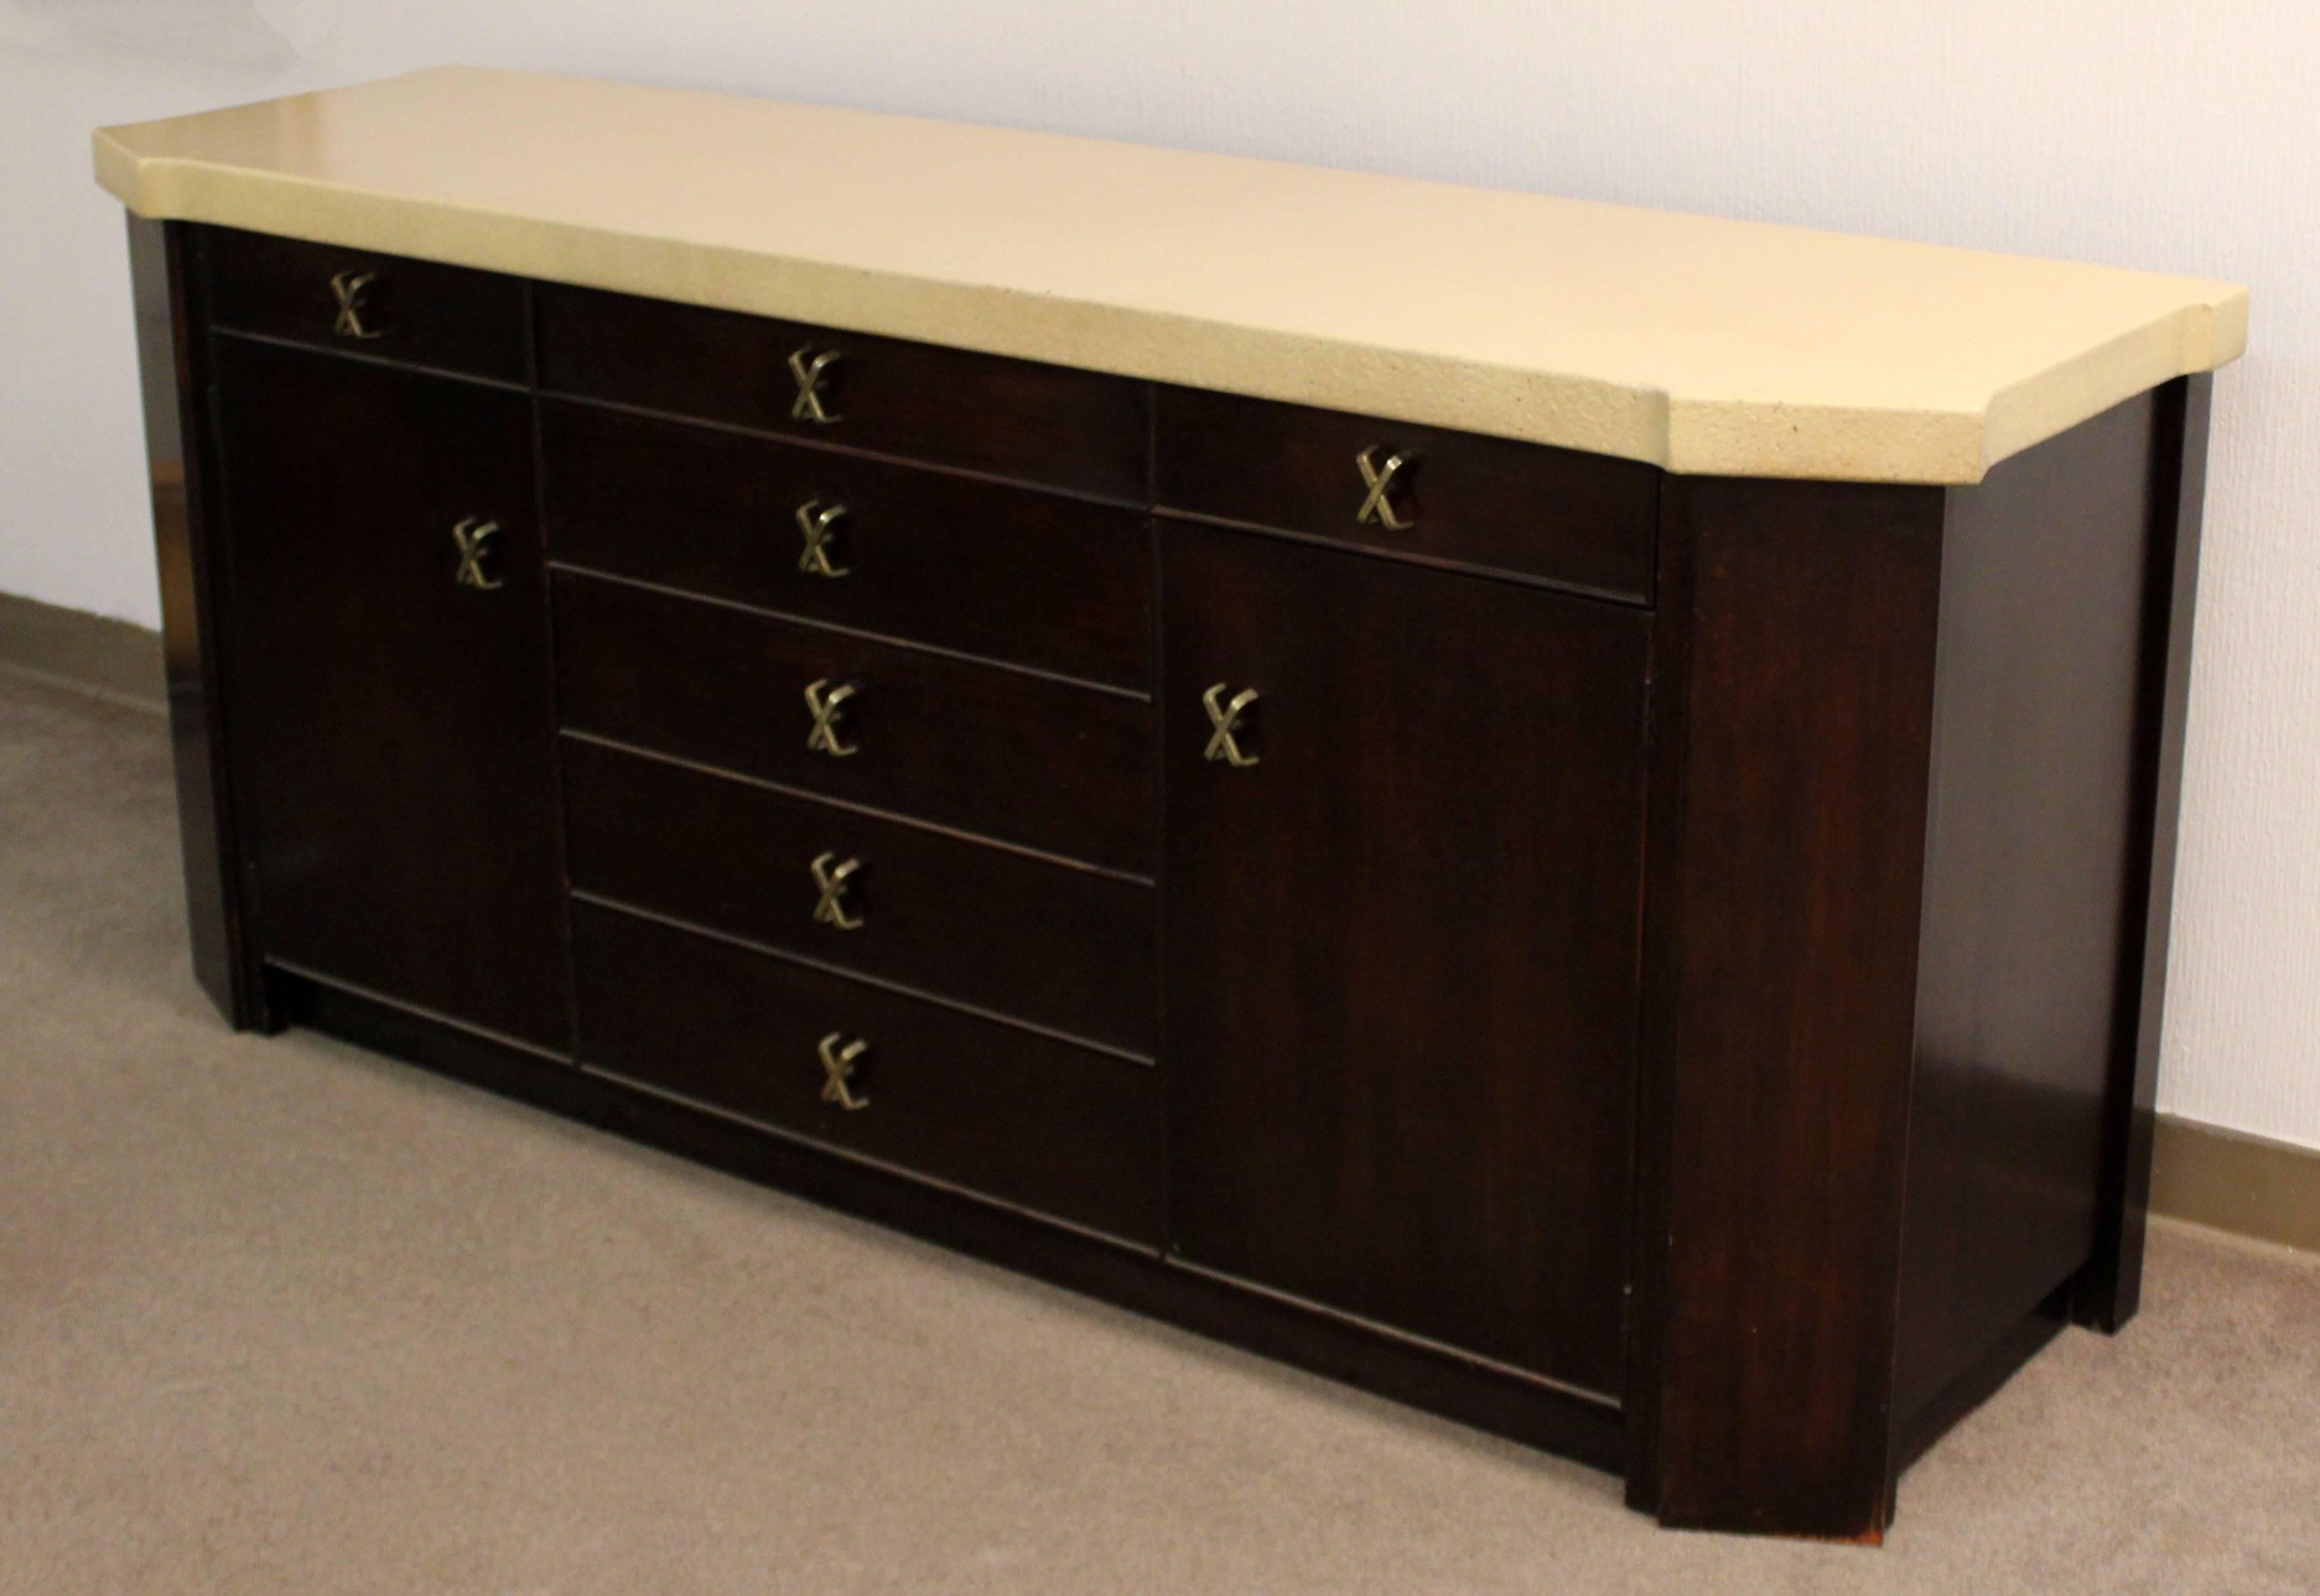 For your consideration is a gorgeous credenza, with a cork top, seven drawers and two shelves, by Paul Frankl for Johnson Furniture, circa the 1950s. In excellent condition. Hutch is also available in a separate posting. The dimensions are 72"